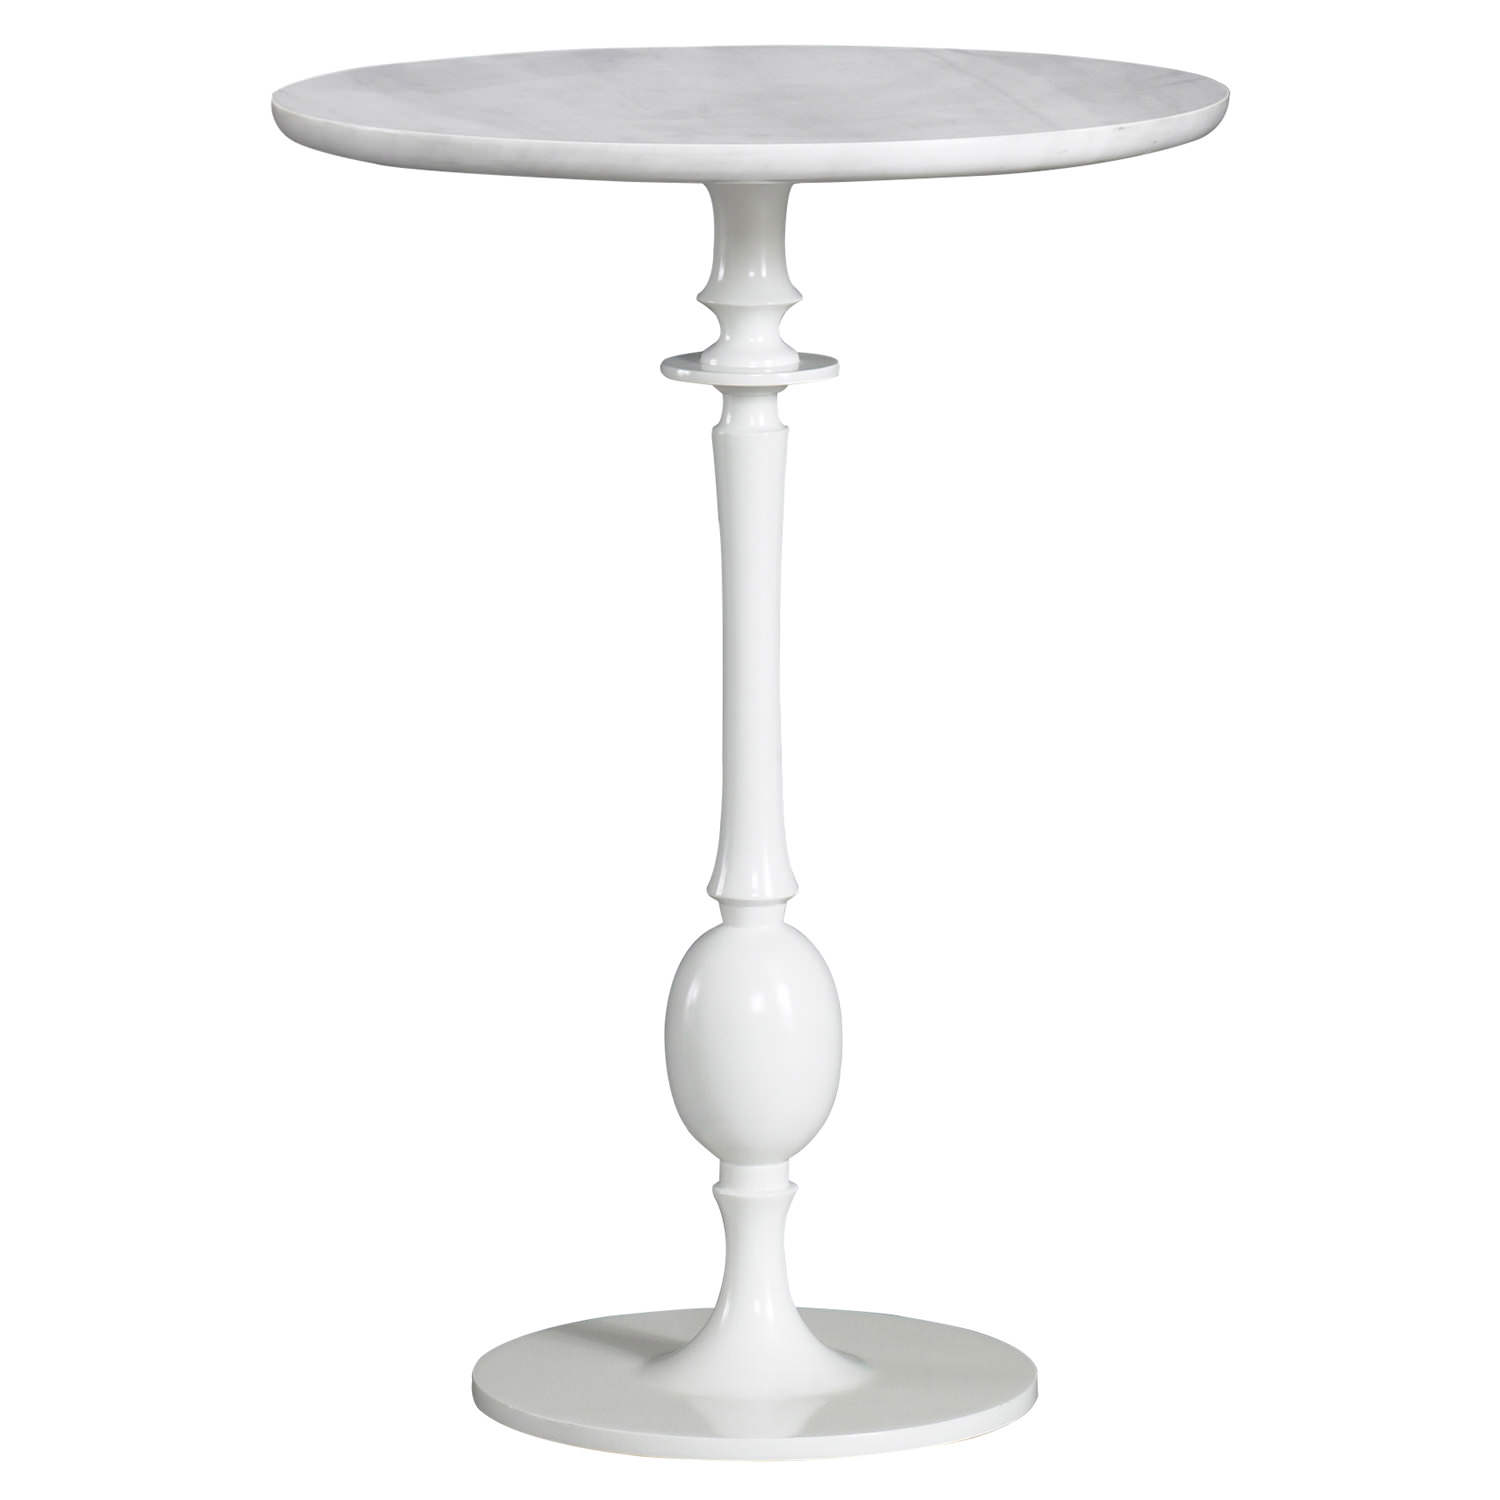 black pedestal accent table khandzoo home decor build white simplify oval back teak folding large umbrella stand distressed coffee and end tables modern lounge west elm marble top